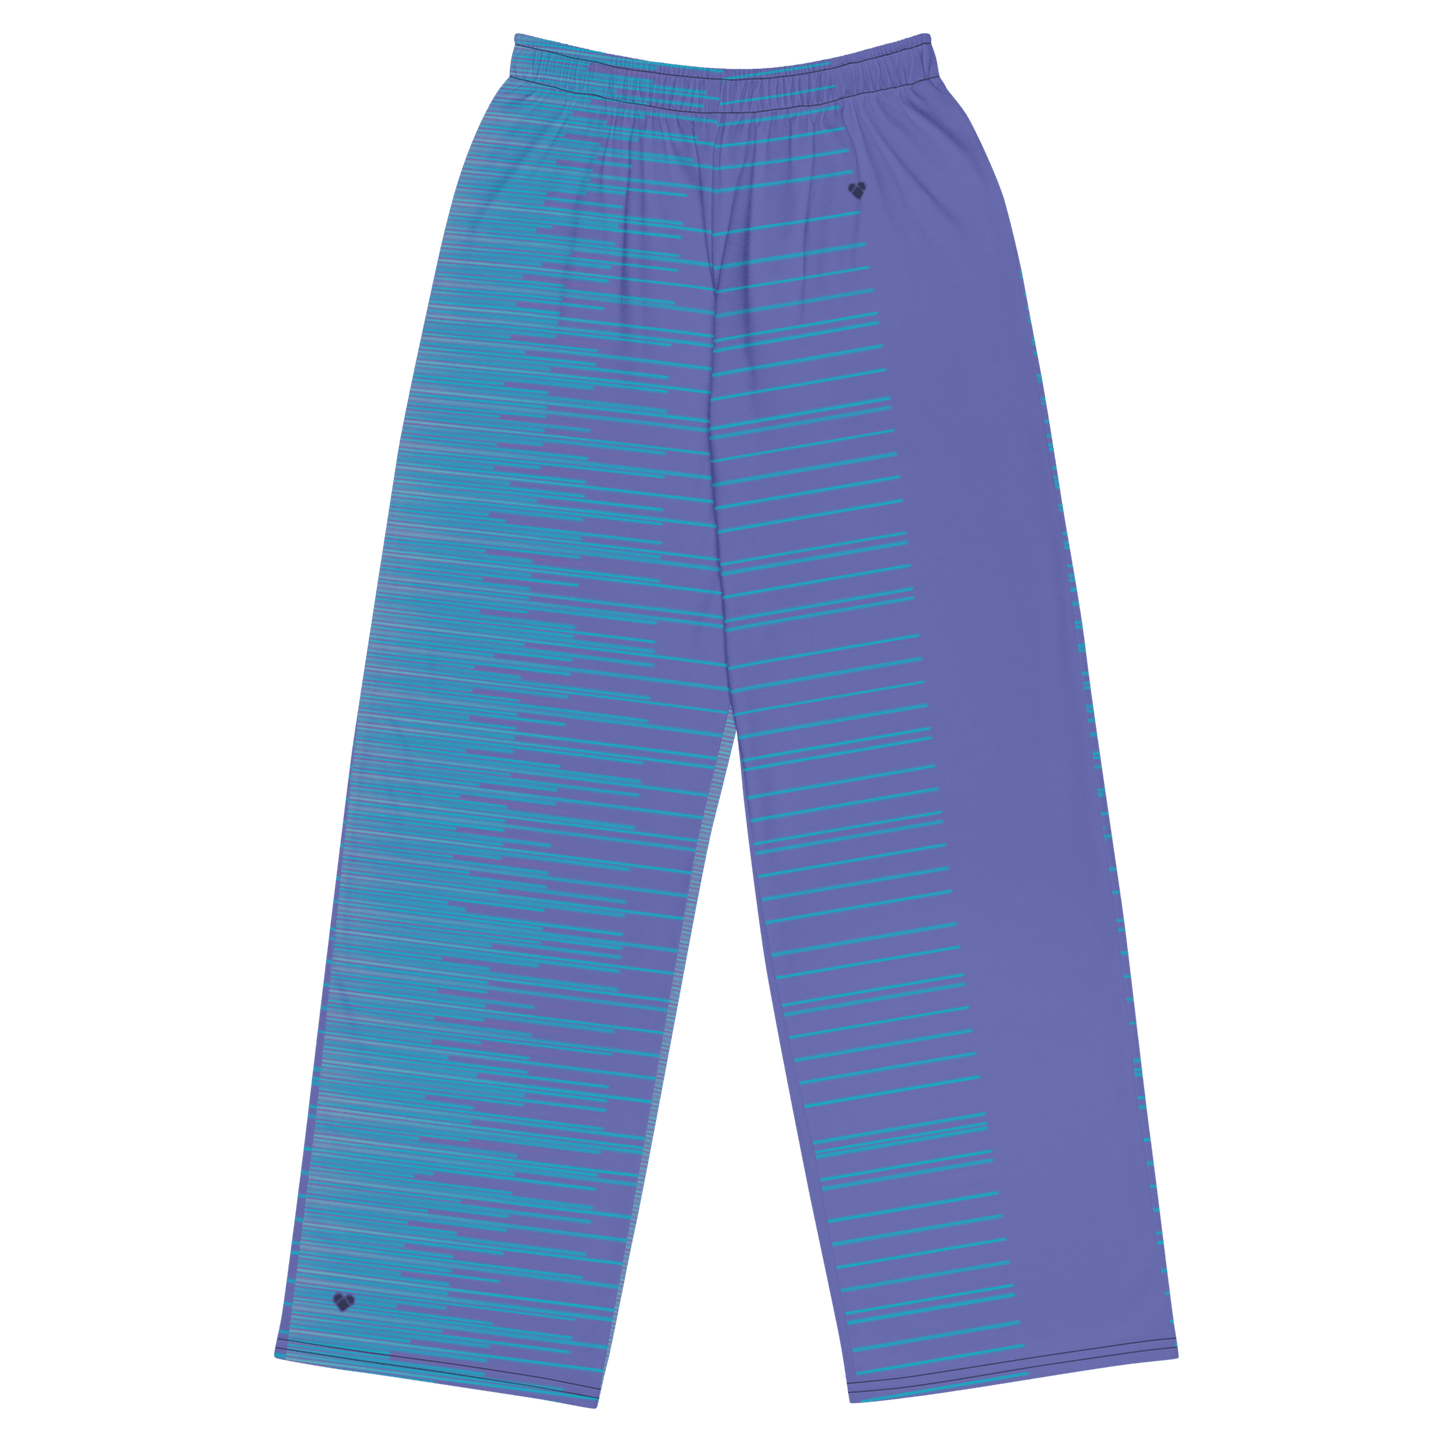 Periwinkle Stripes Dual Pants, a versatile addition to your wardrobe from CRiZ AMOR